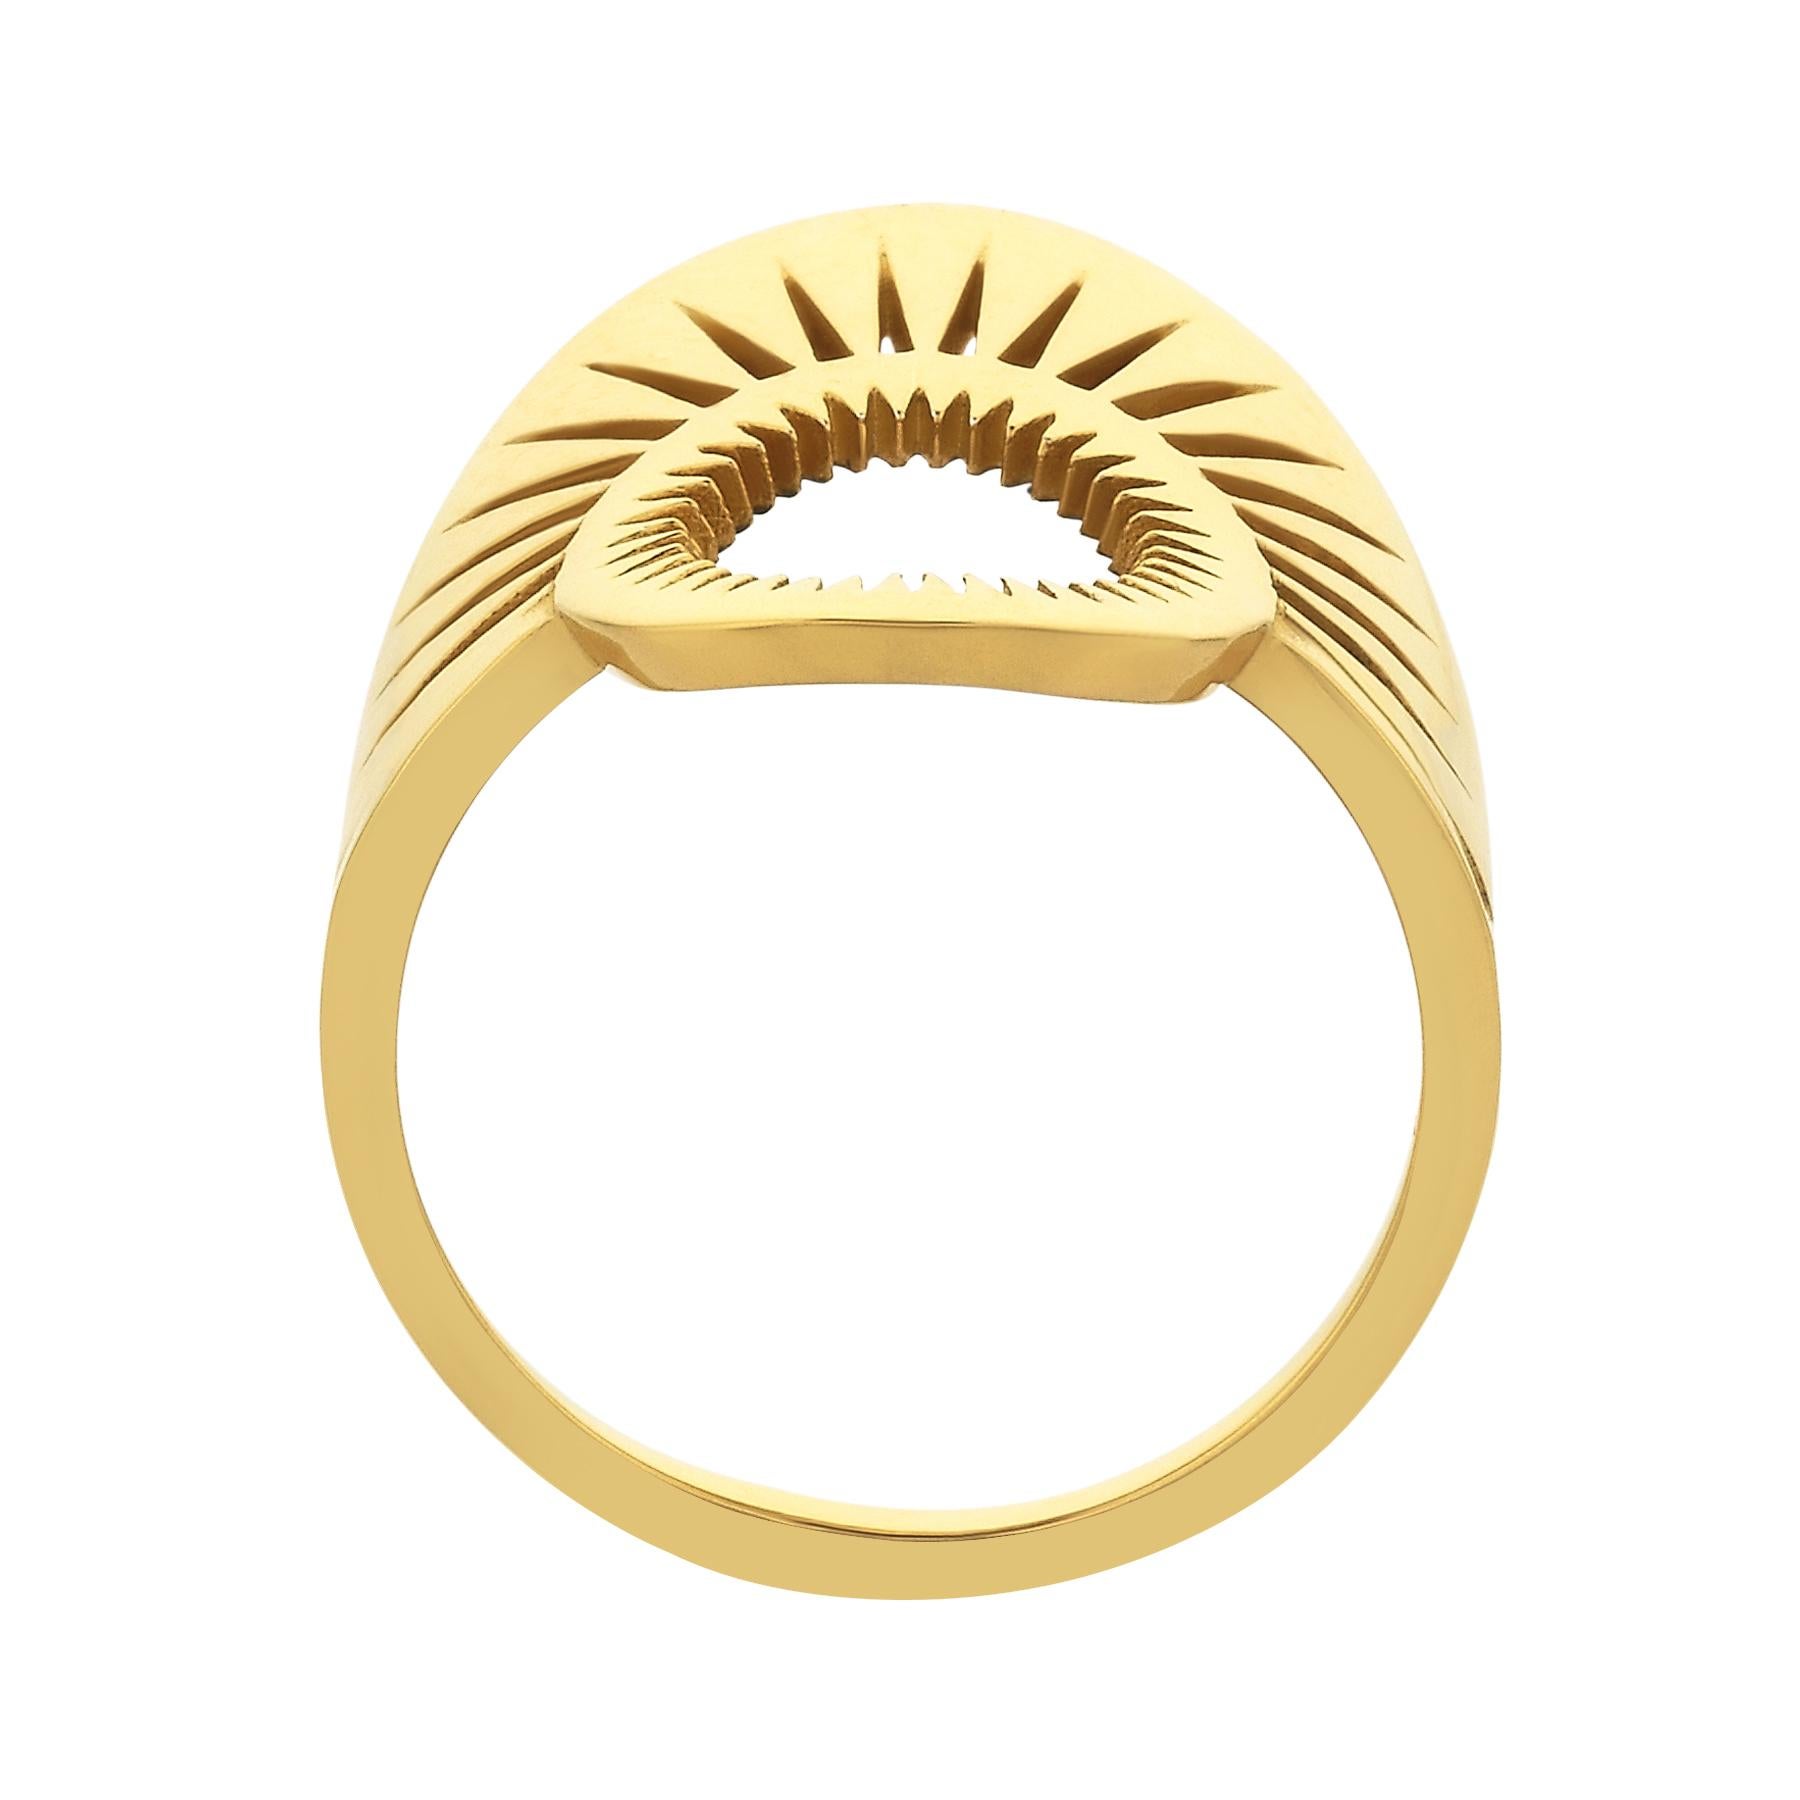 Contemporary Zoe and Morgan Gold Pocket Full of Sunshine Ring For Sale